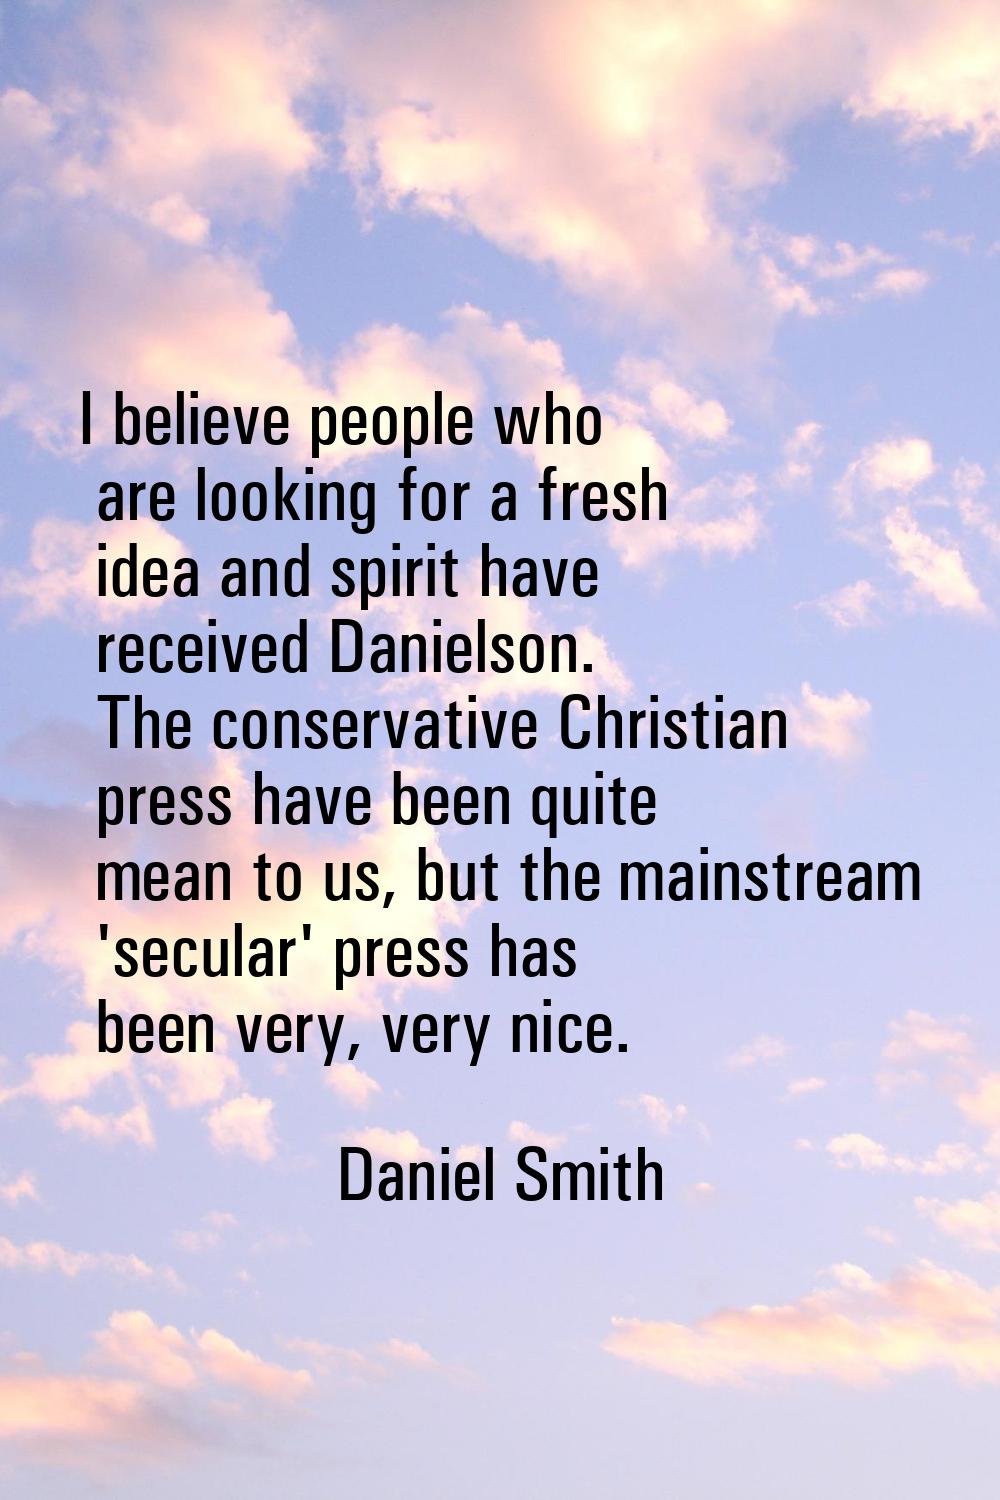 I believe people who are looking for a fresh idea and spirit have received Danielson. The conservat